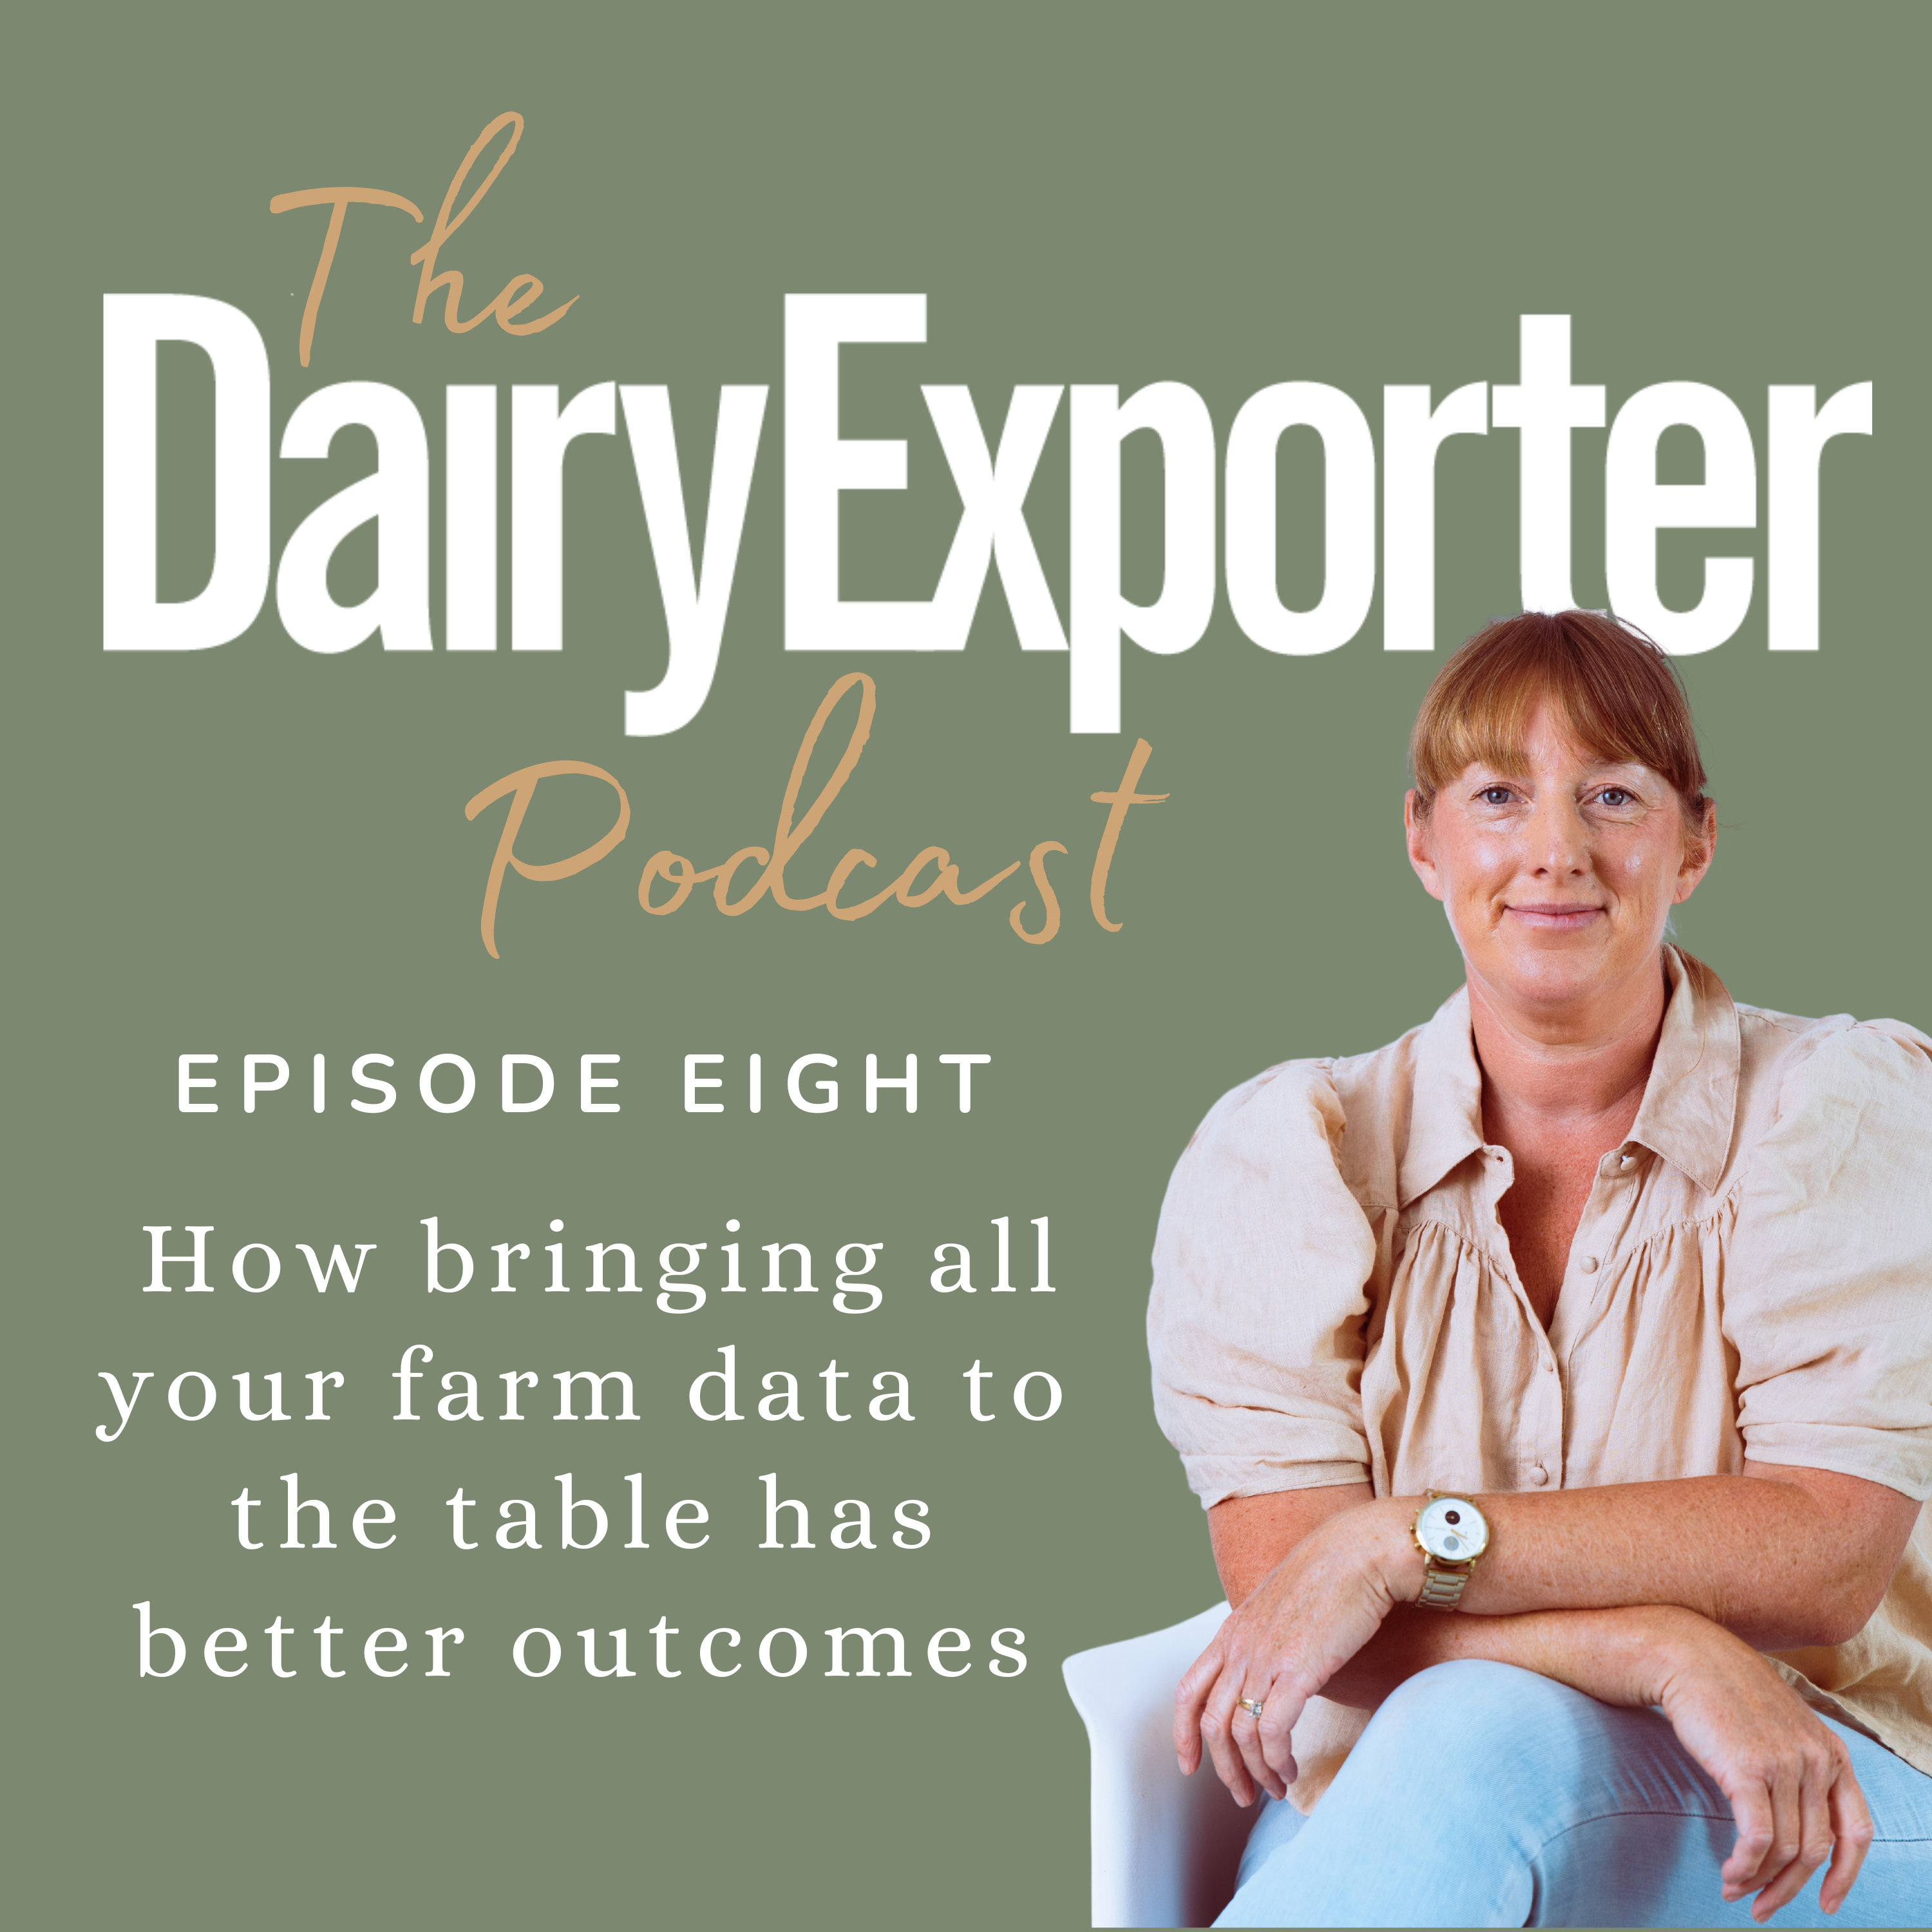 Episode 8 - How bringing all your farm data to the table has better outcomes